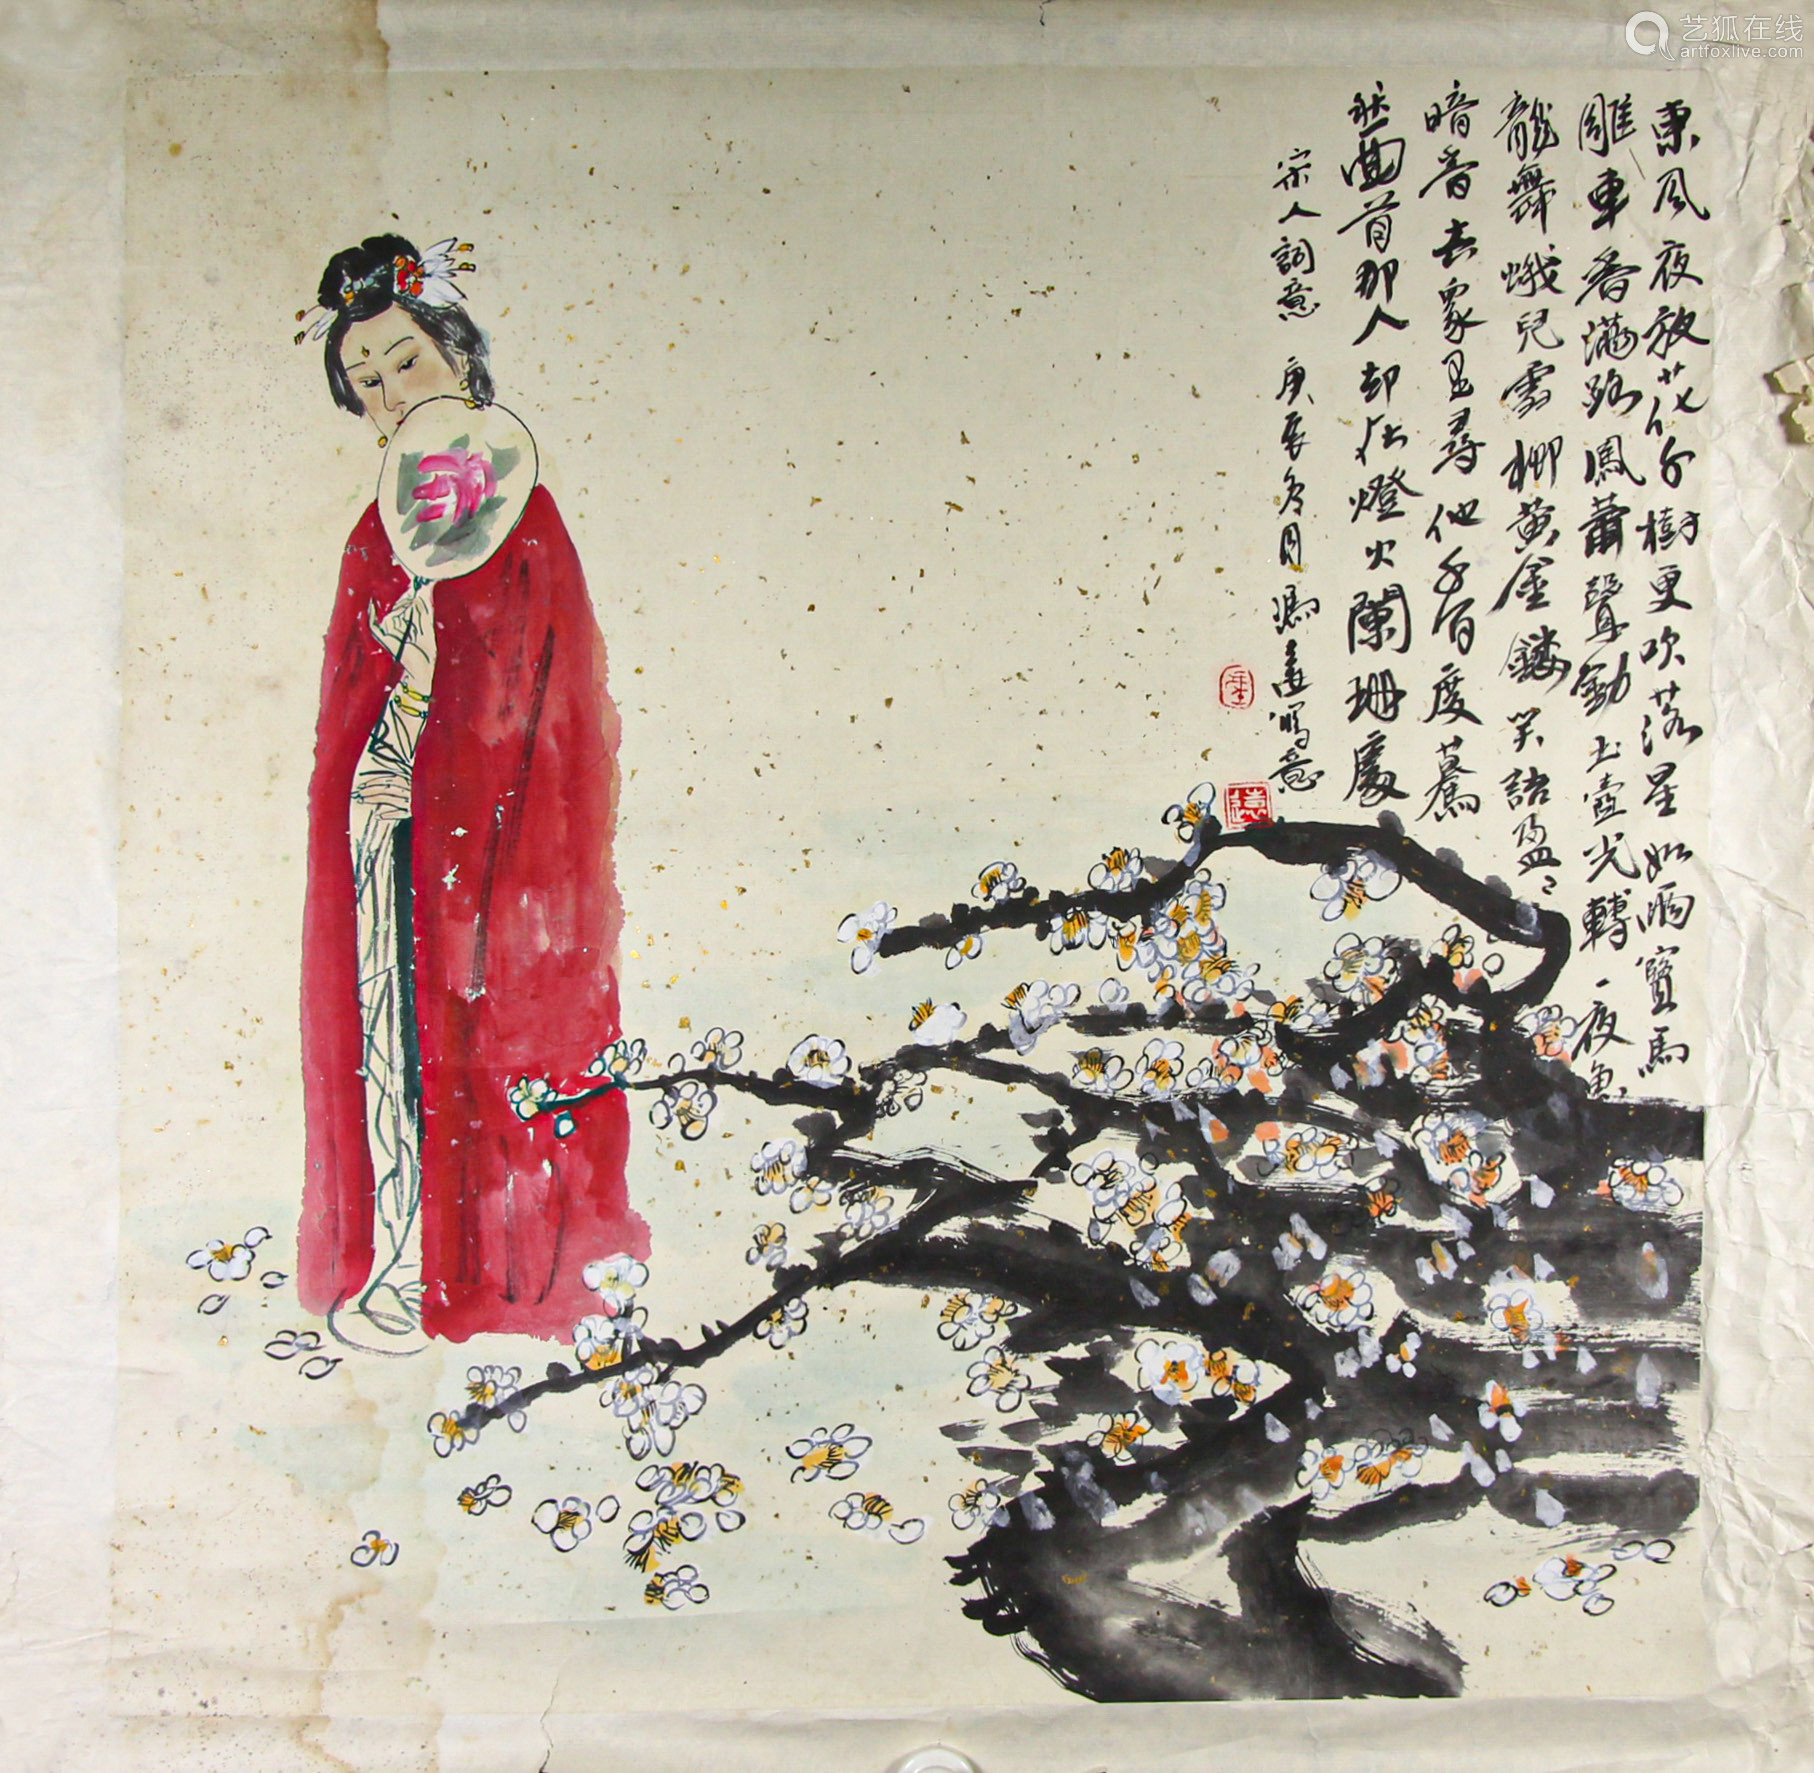 Chinese ink painting,
Feng Yuan's 